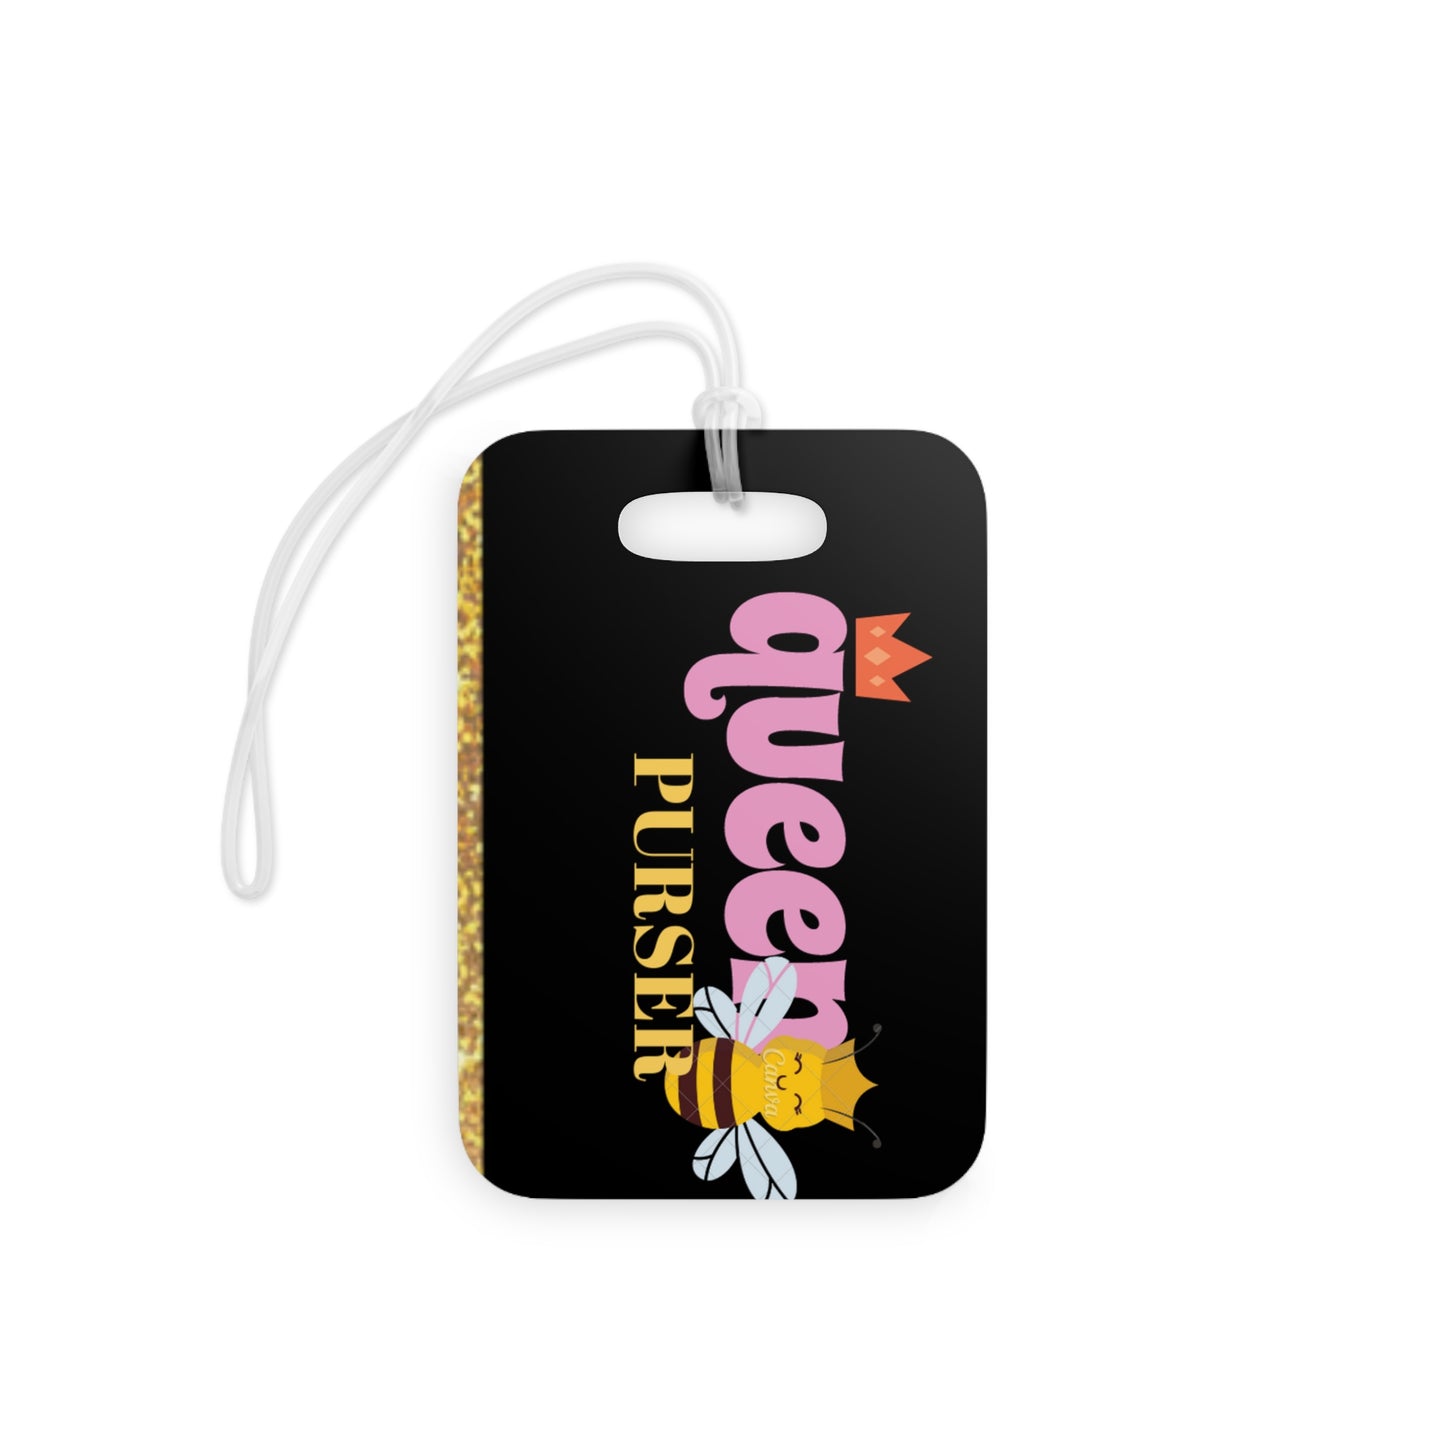 Queen B Luggage Tags